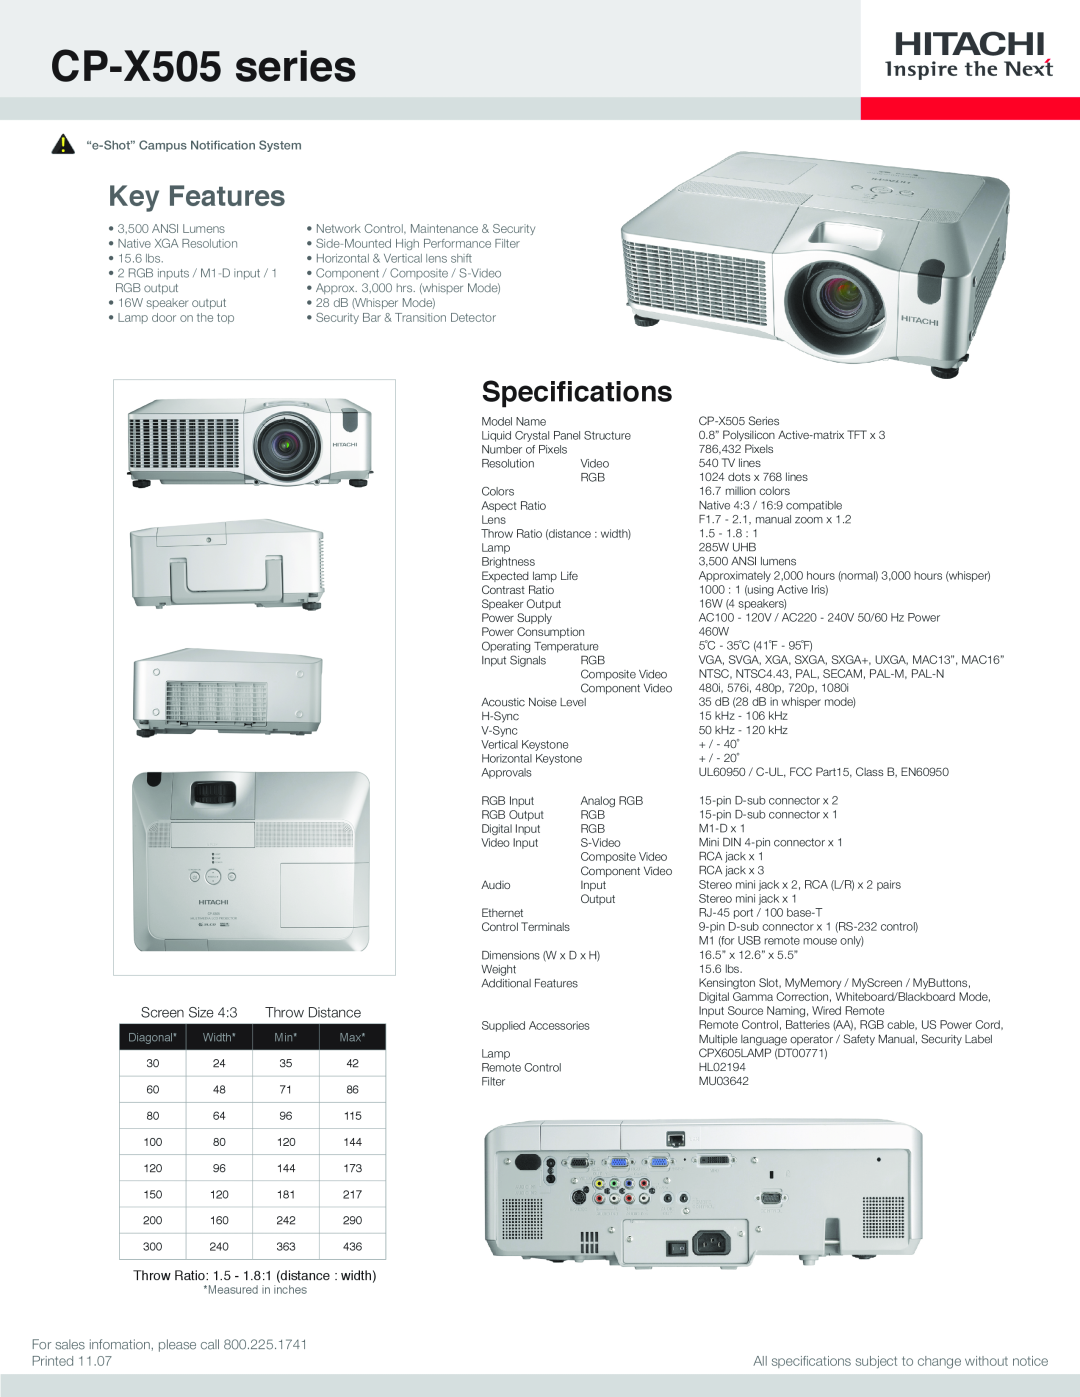 Hitachi specifications CP-X505series, Key Features, Speciﬁcations, Screen Size, Throw Distance, Printed, Diagonal 